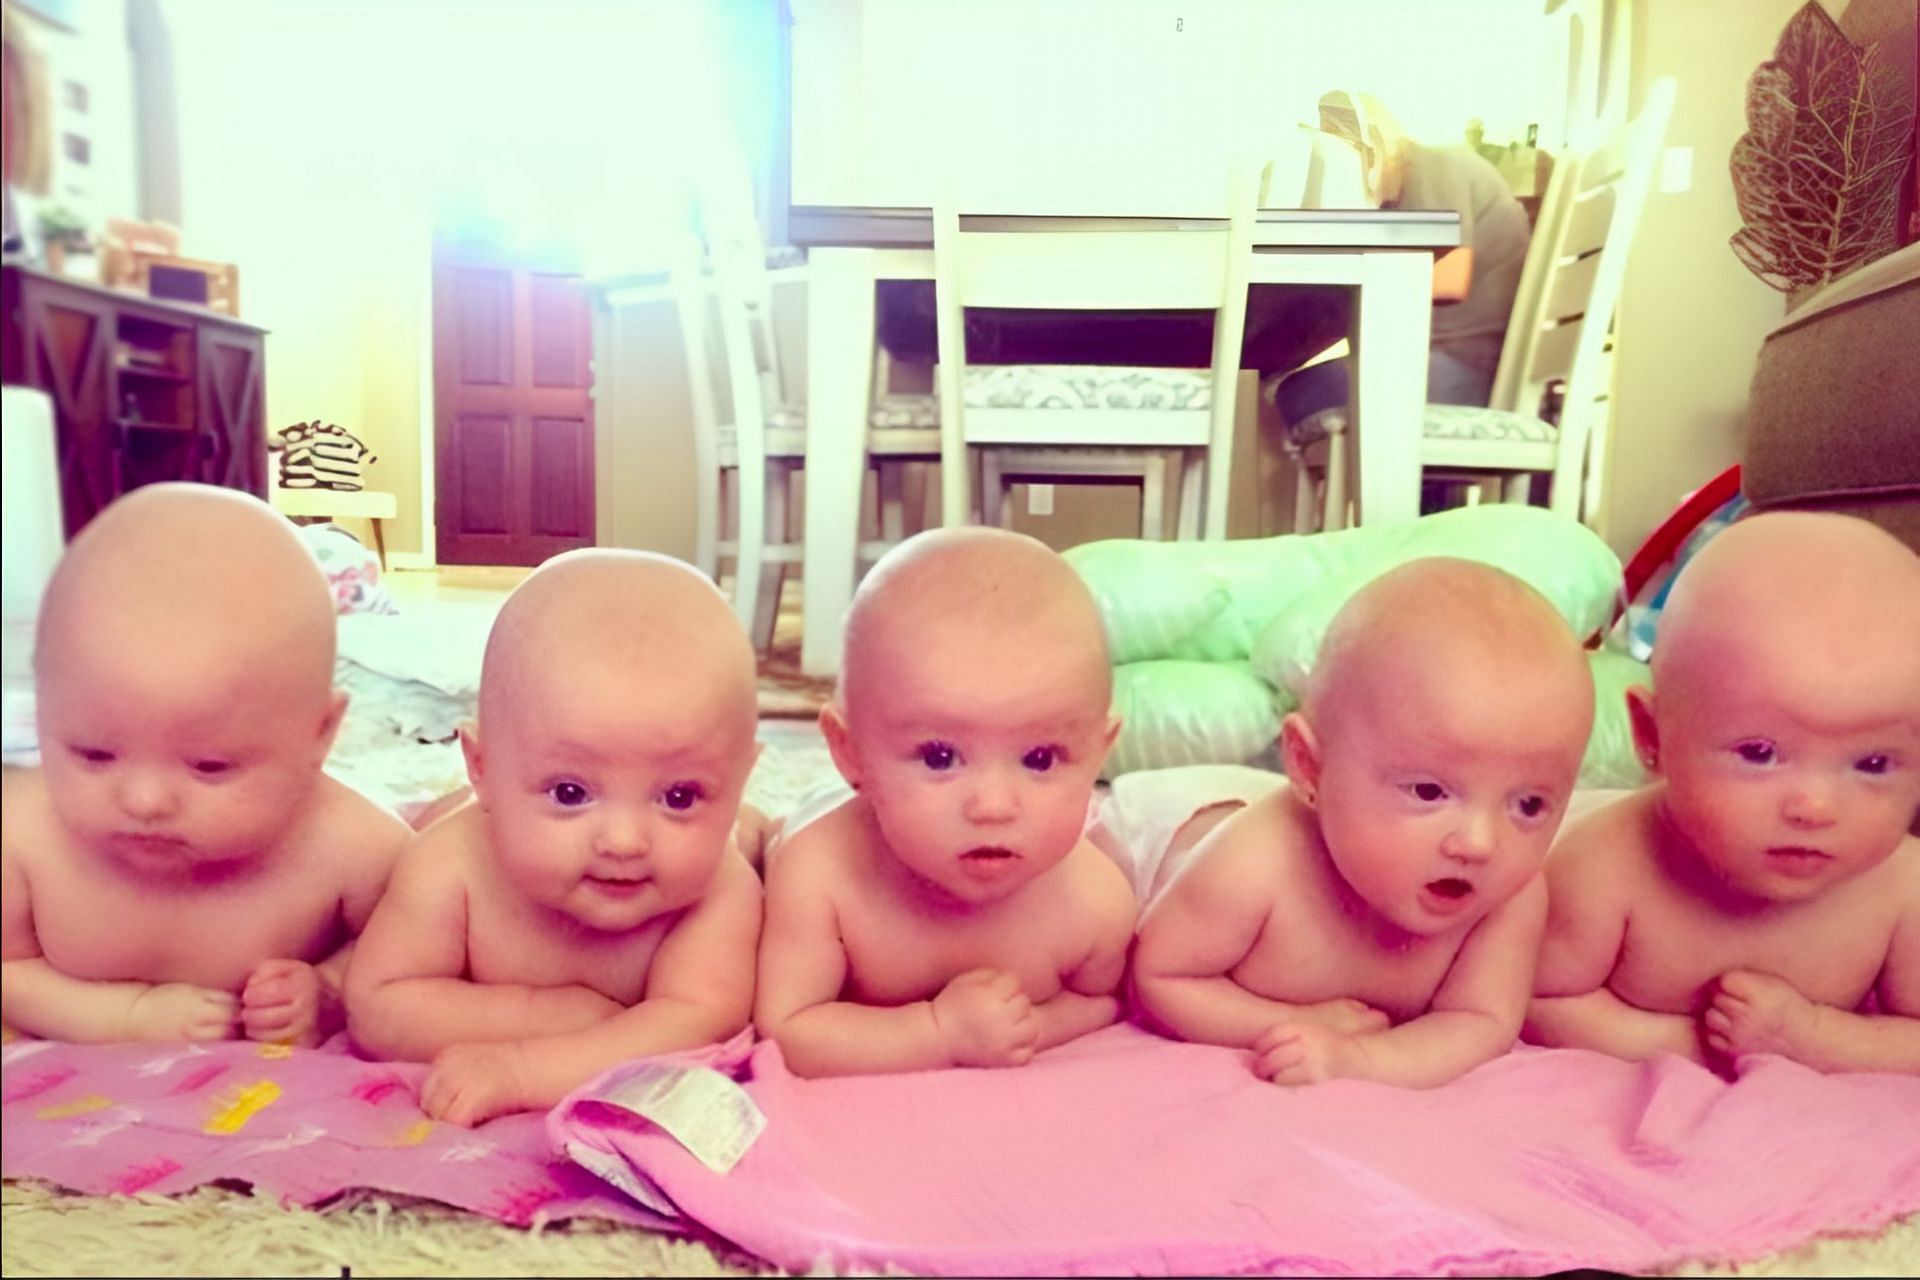 An old photo of the quintuplets (Image via TLC)